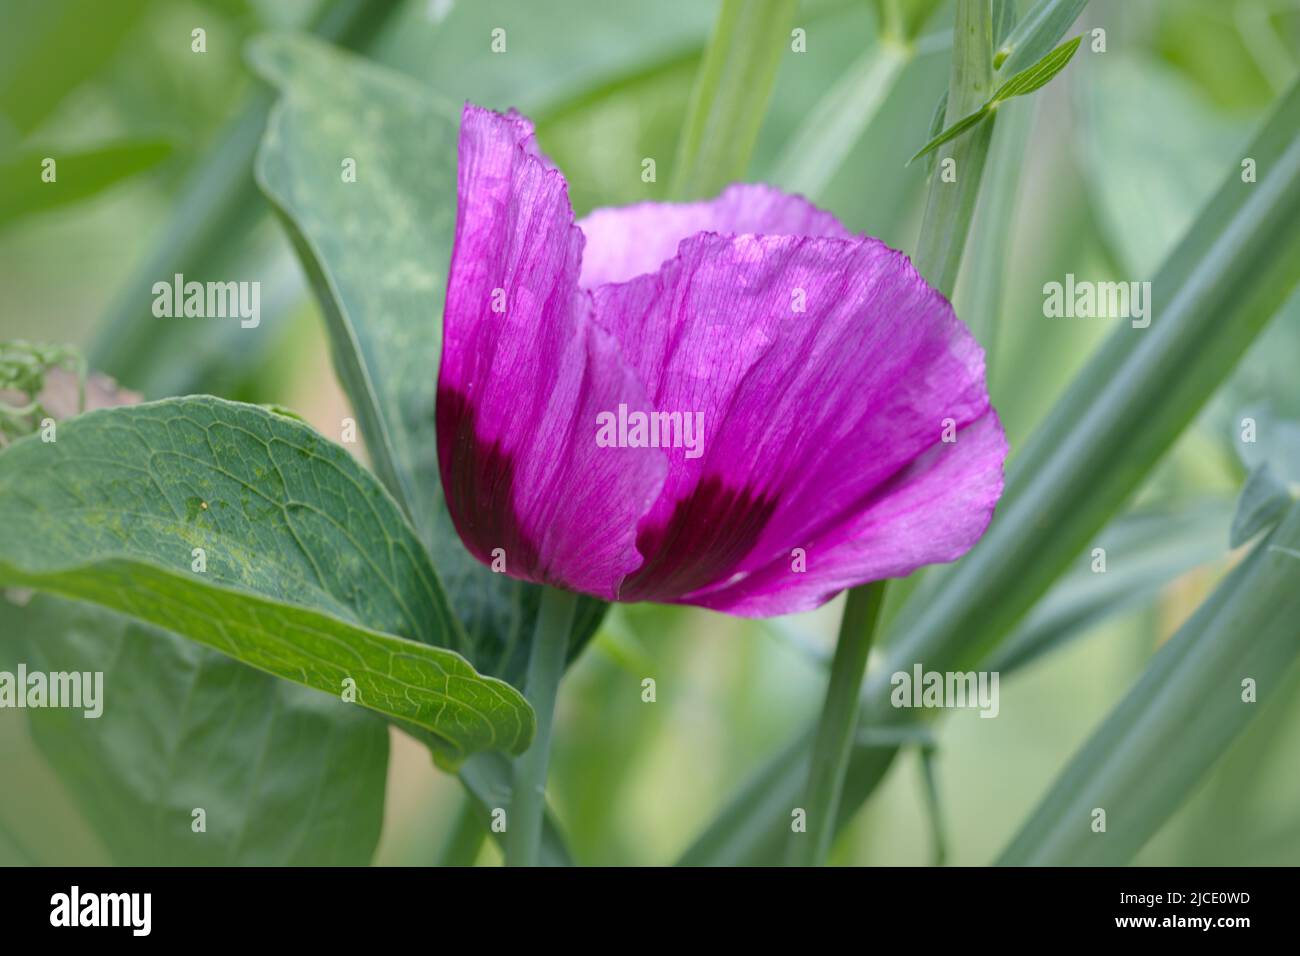 Macro photography of a blooming flower in summer Stock Photo